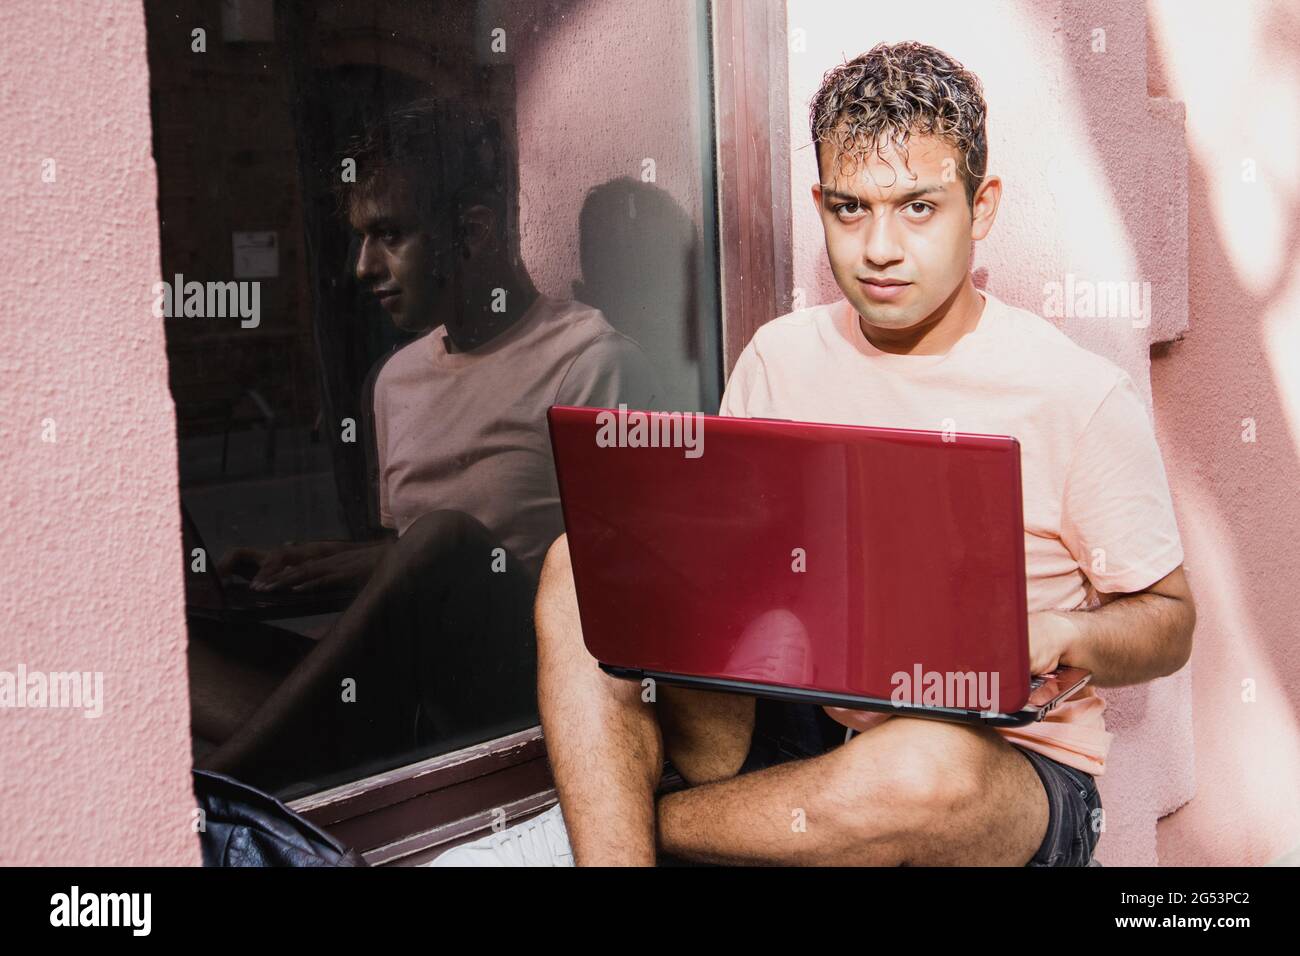 Hispanic boy with laptop. Latino young man working with computer and looking at camera. Stock Photo